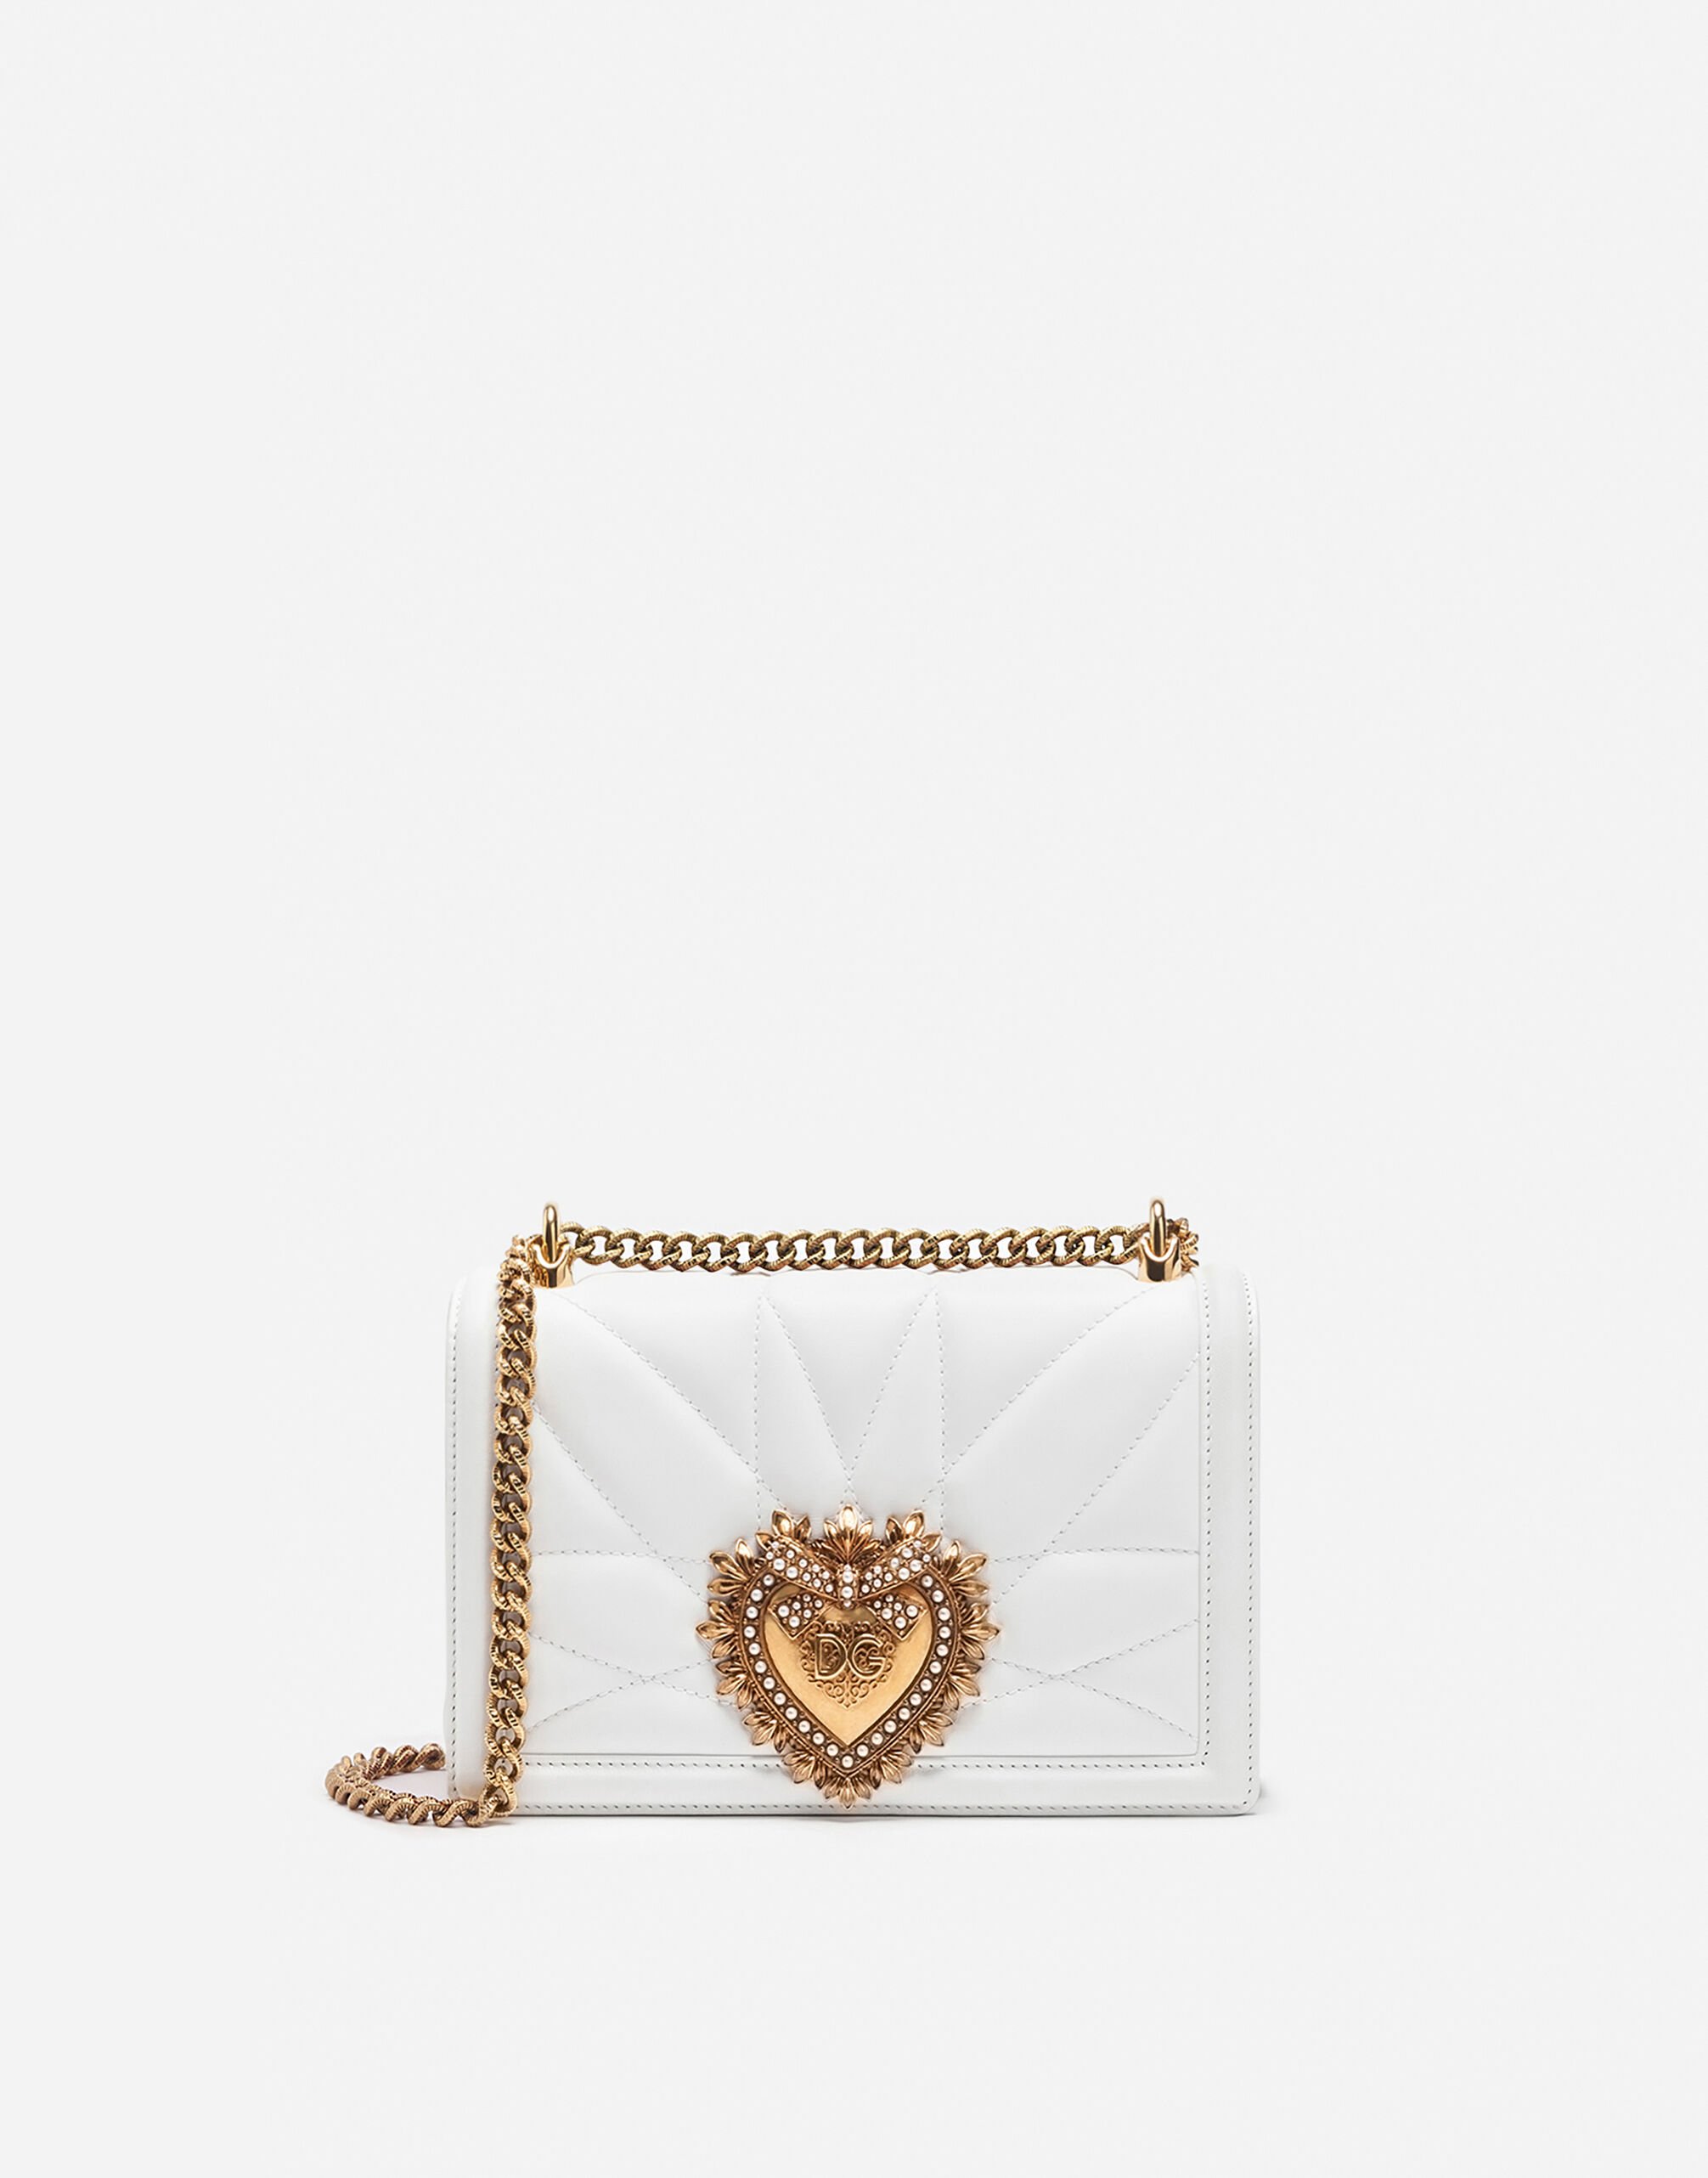 Dolce & Gabbana Medium Devotion crossbody bag in quilted nappa leather White/Black CK1791AX589